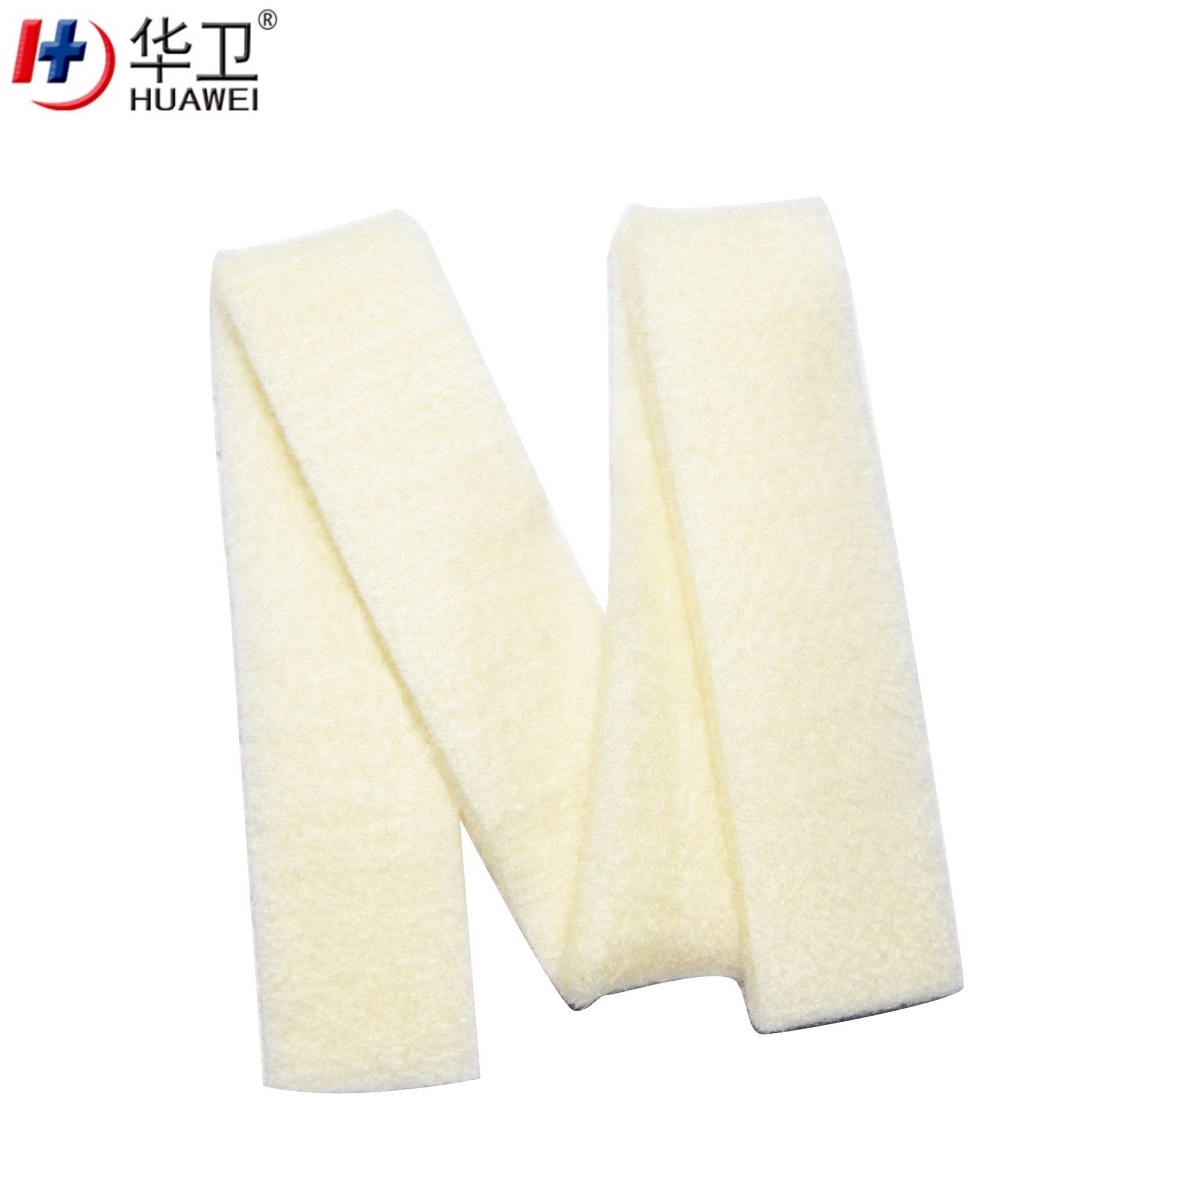 Huawei best medical patch suppliers for wounds-2